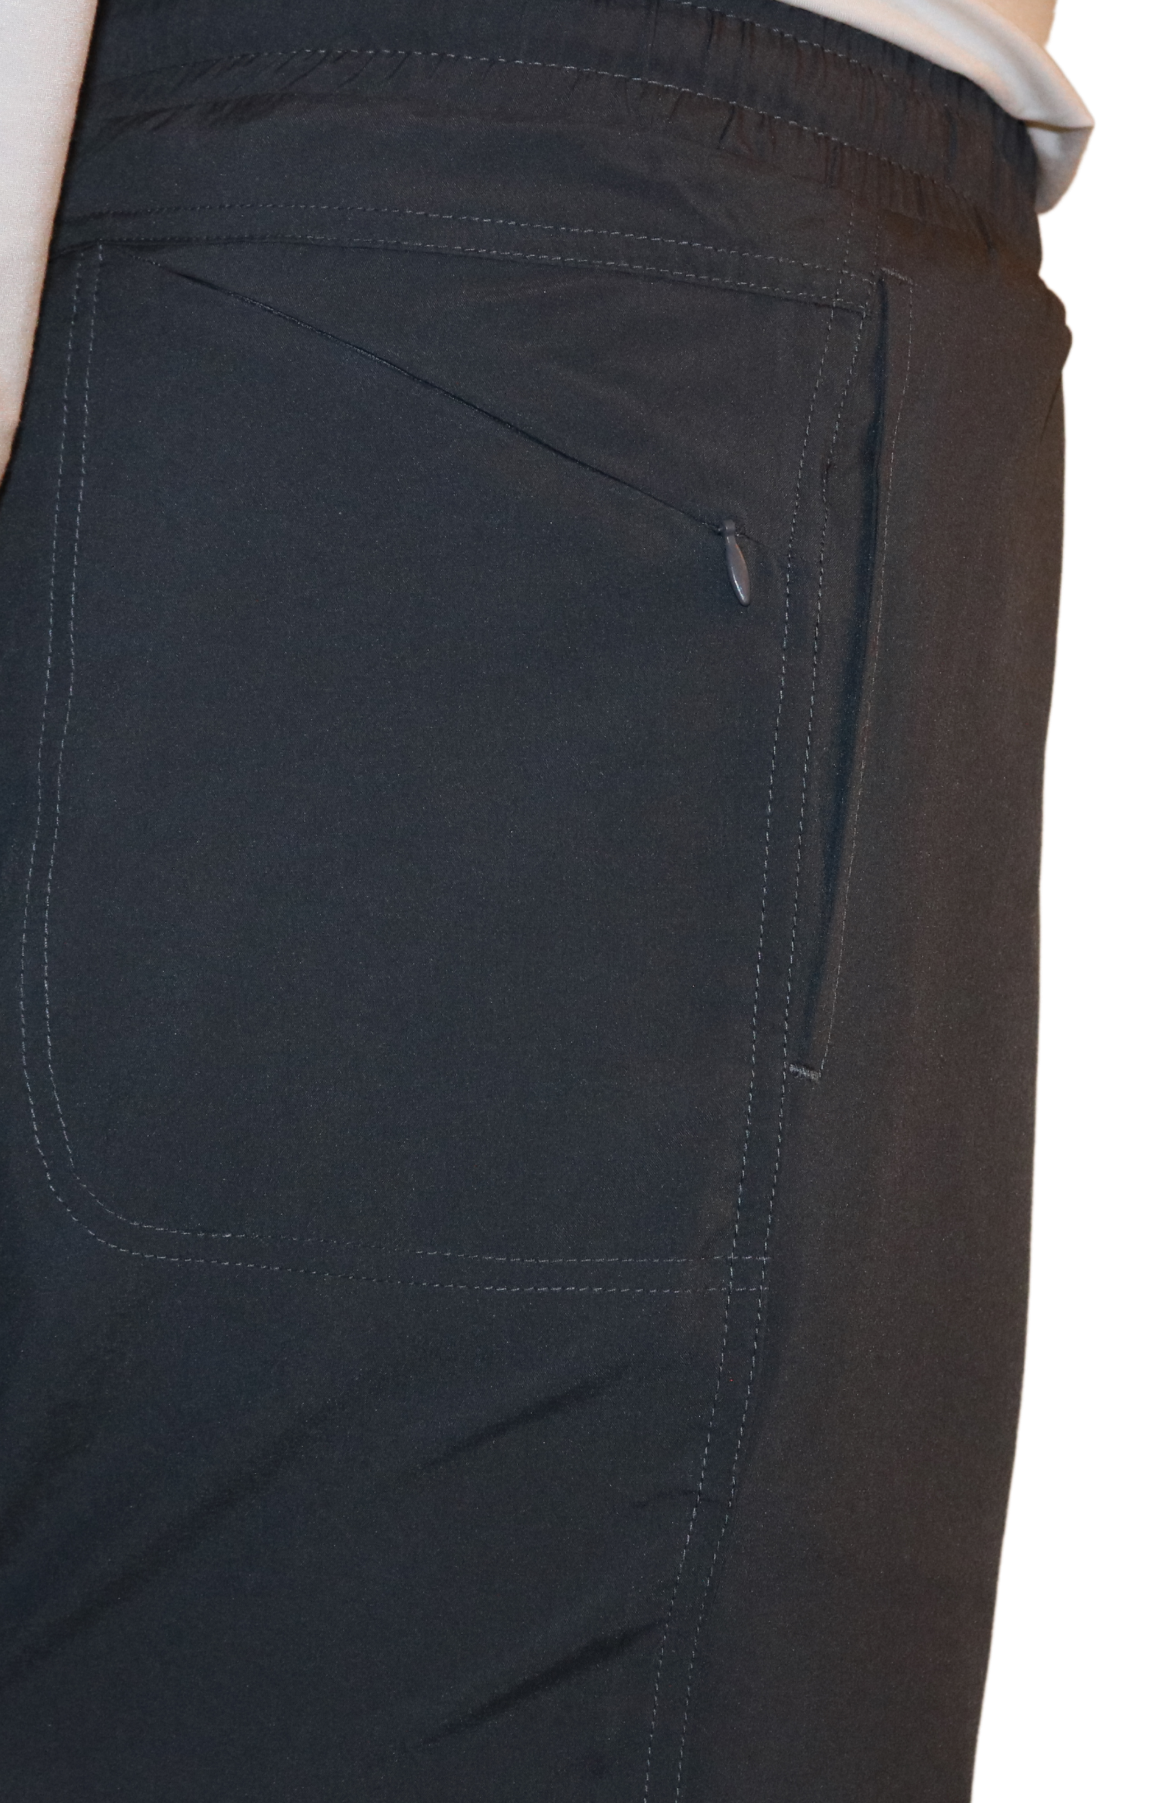 Back zipper pocket on the Bamboo Lined Sabalo Fishing Shorts. These fishing shorts are perfect for long days on the water.